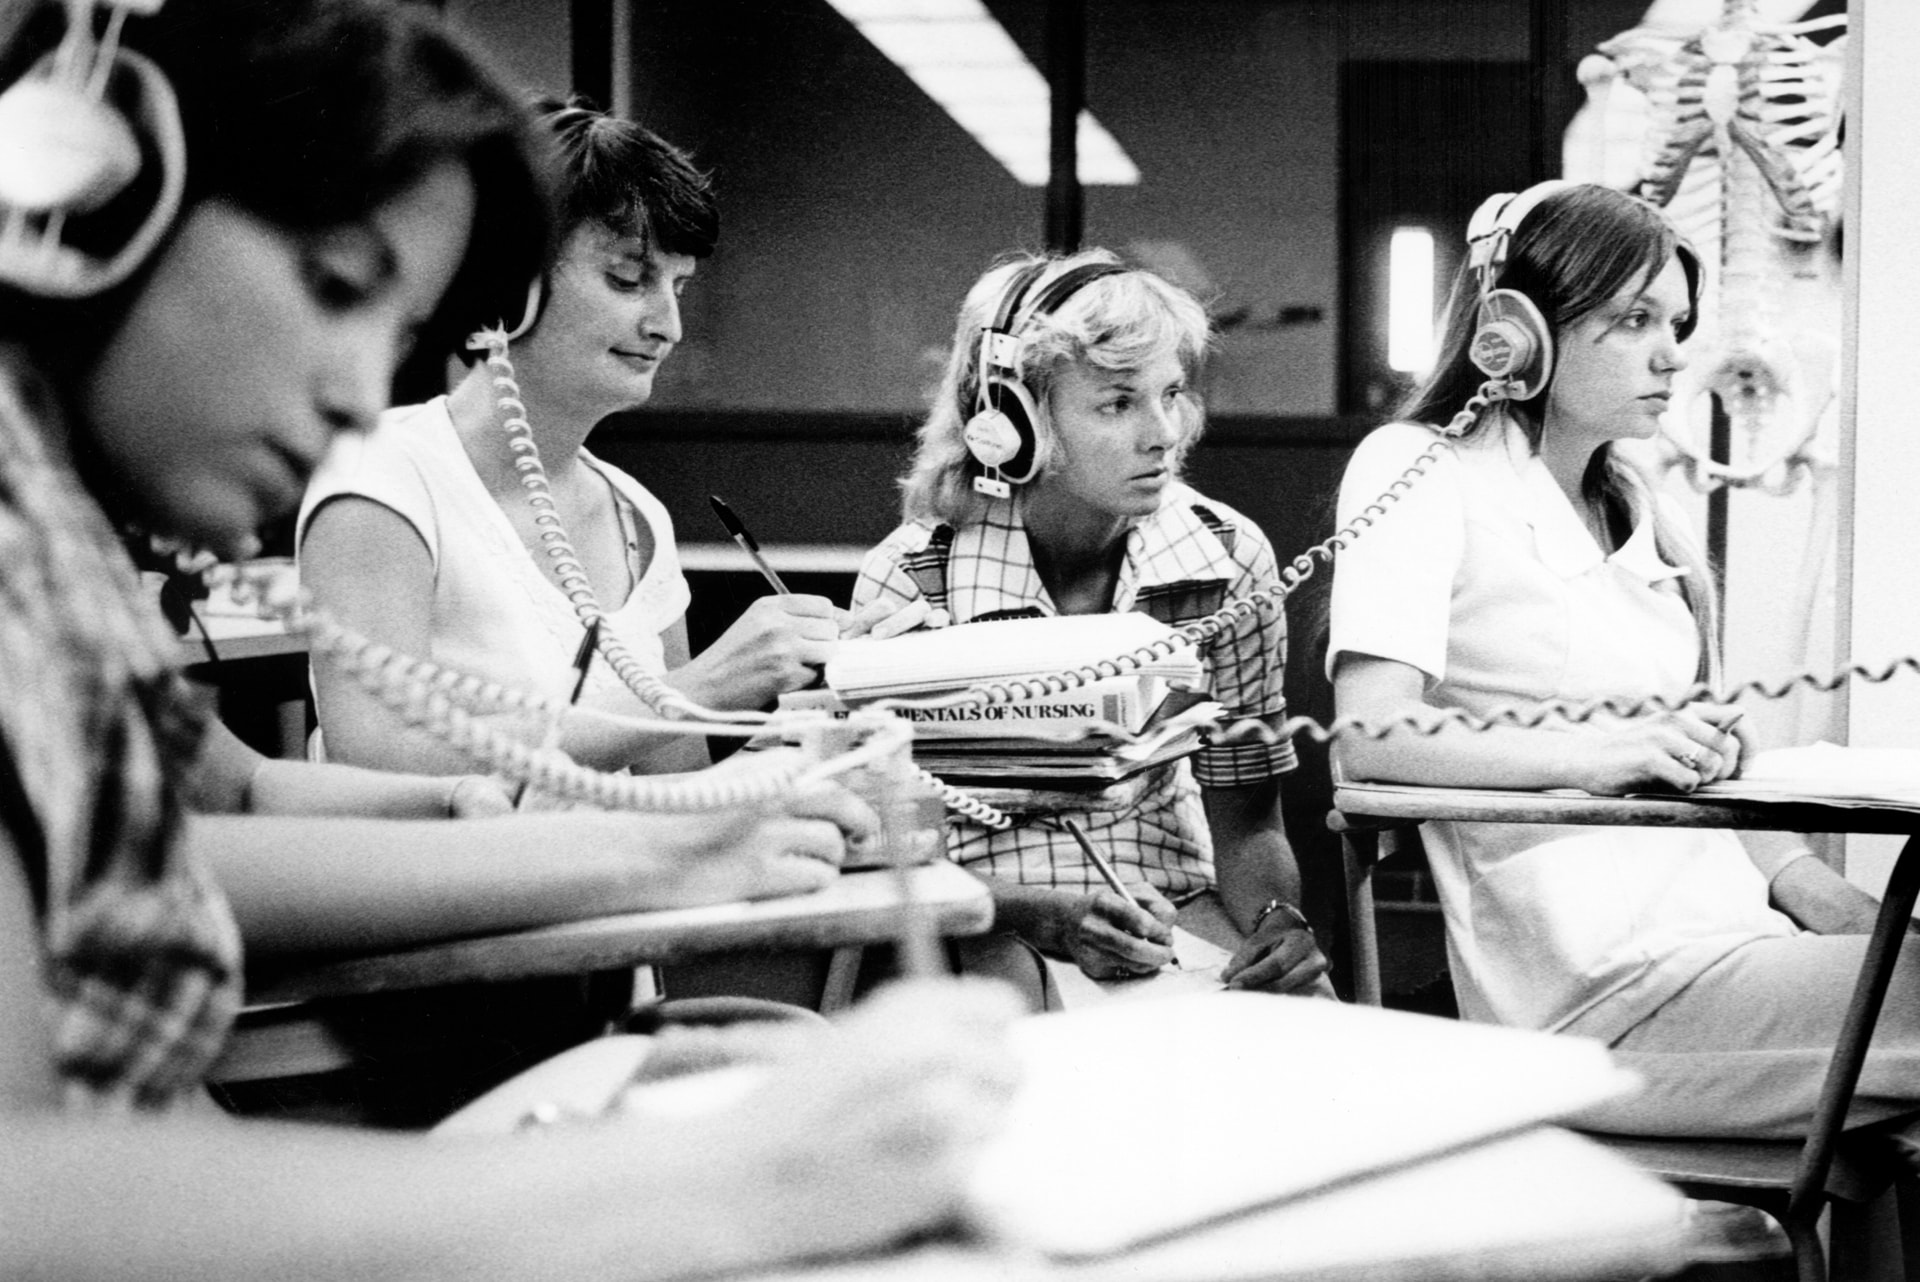 Nursing students in the 1960s